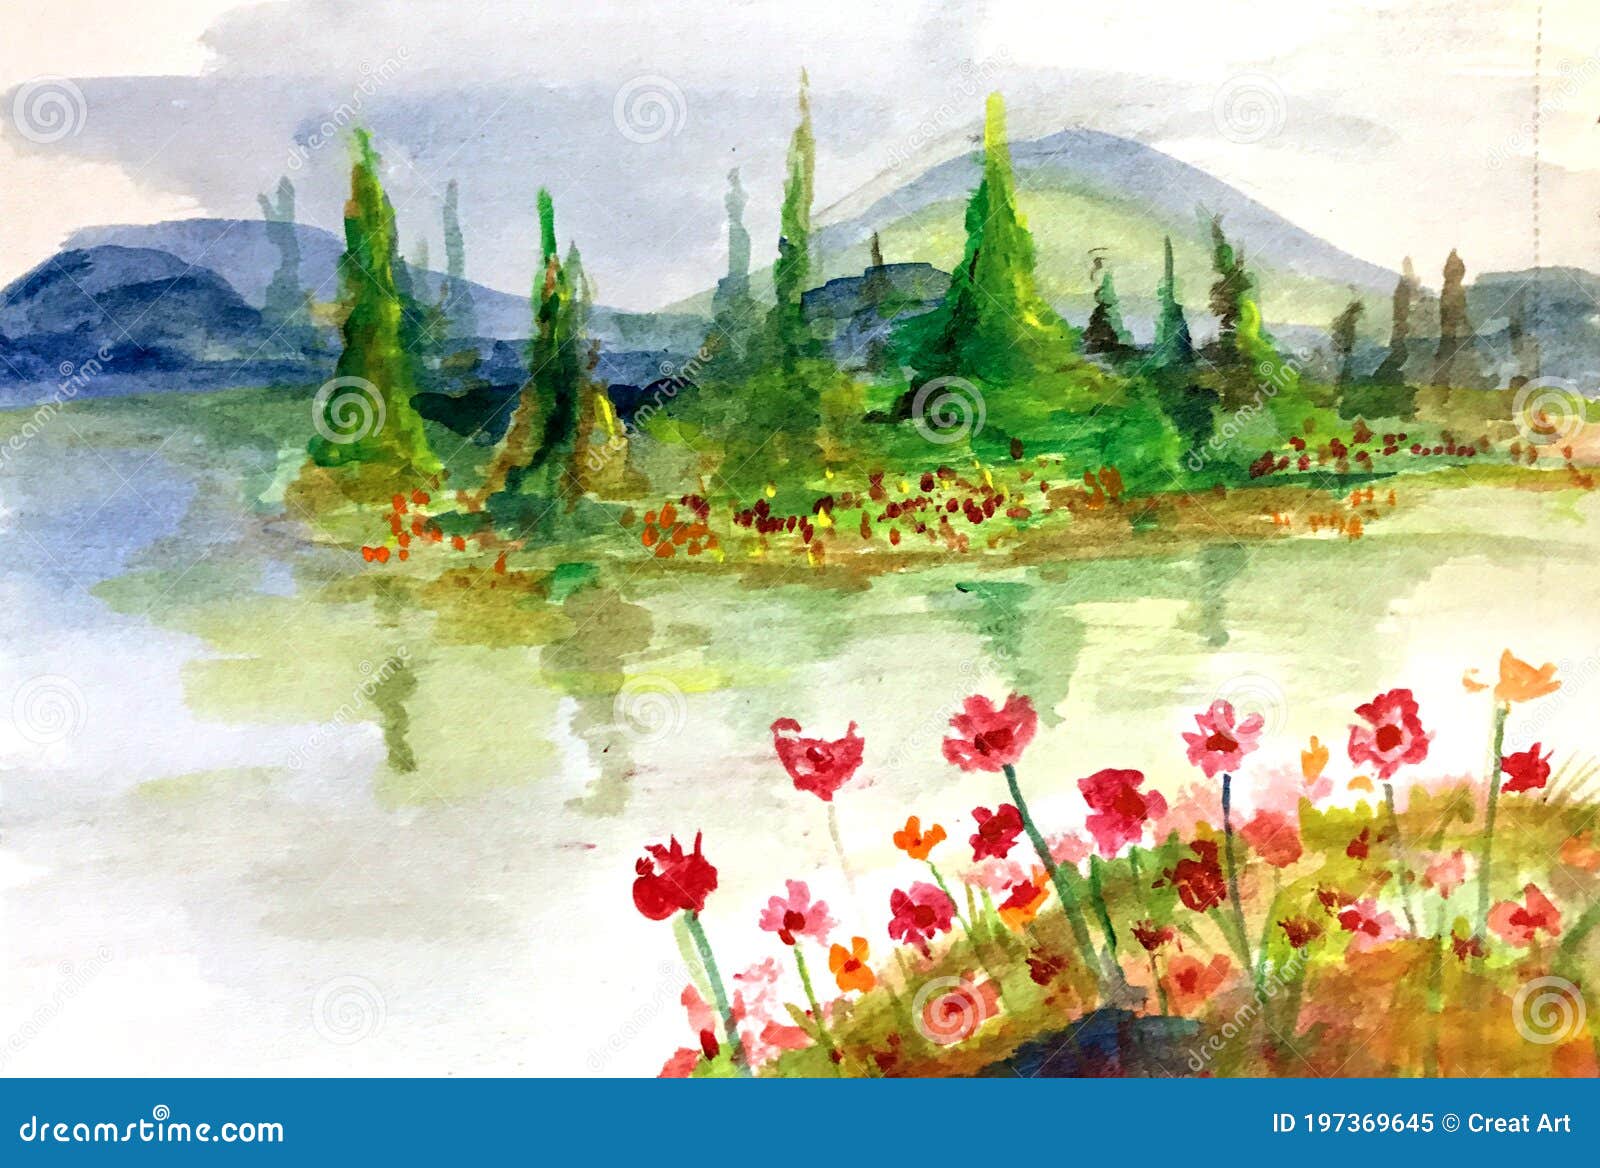 Pine Trees River and Flowers Beautiful Nature Landscape Water ...